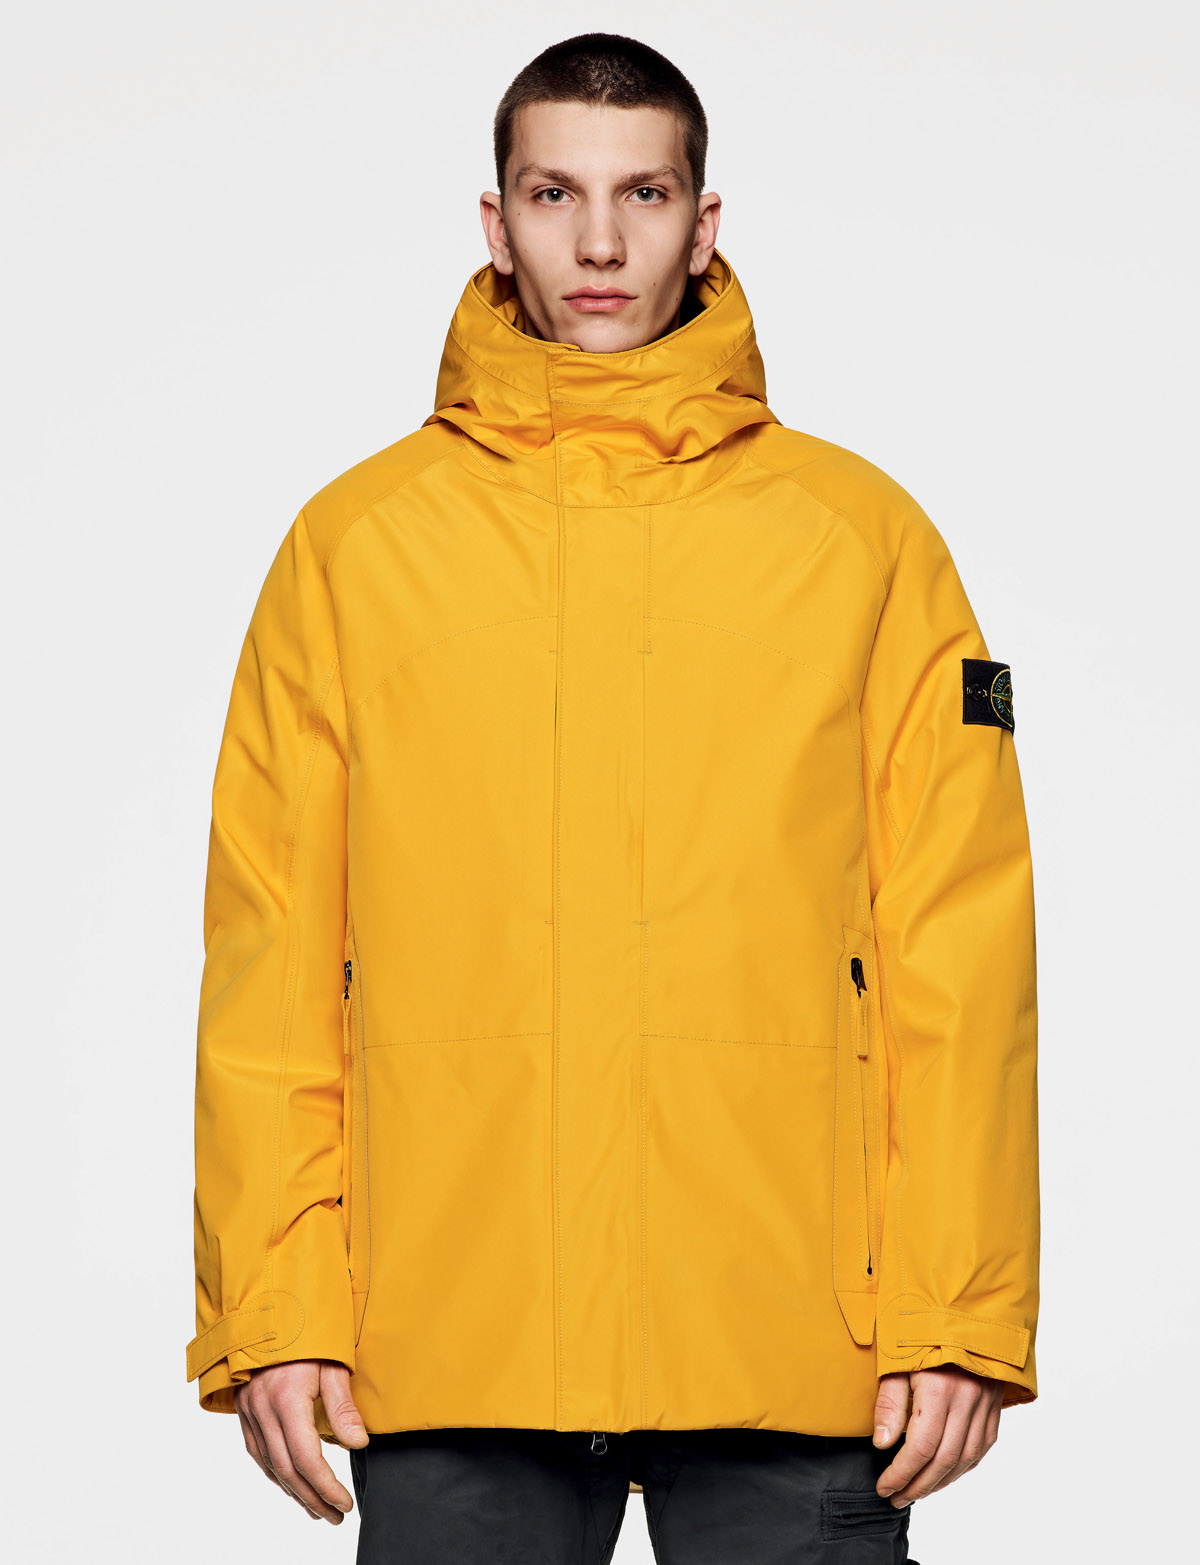 Stone Island: 40 Years Without Compromise | Highsnobiety